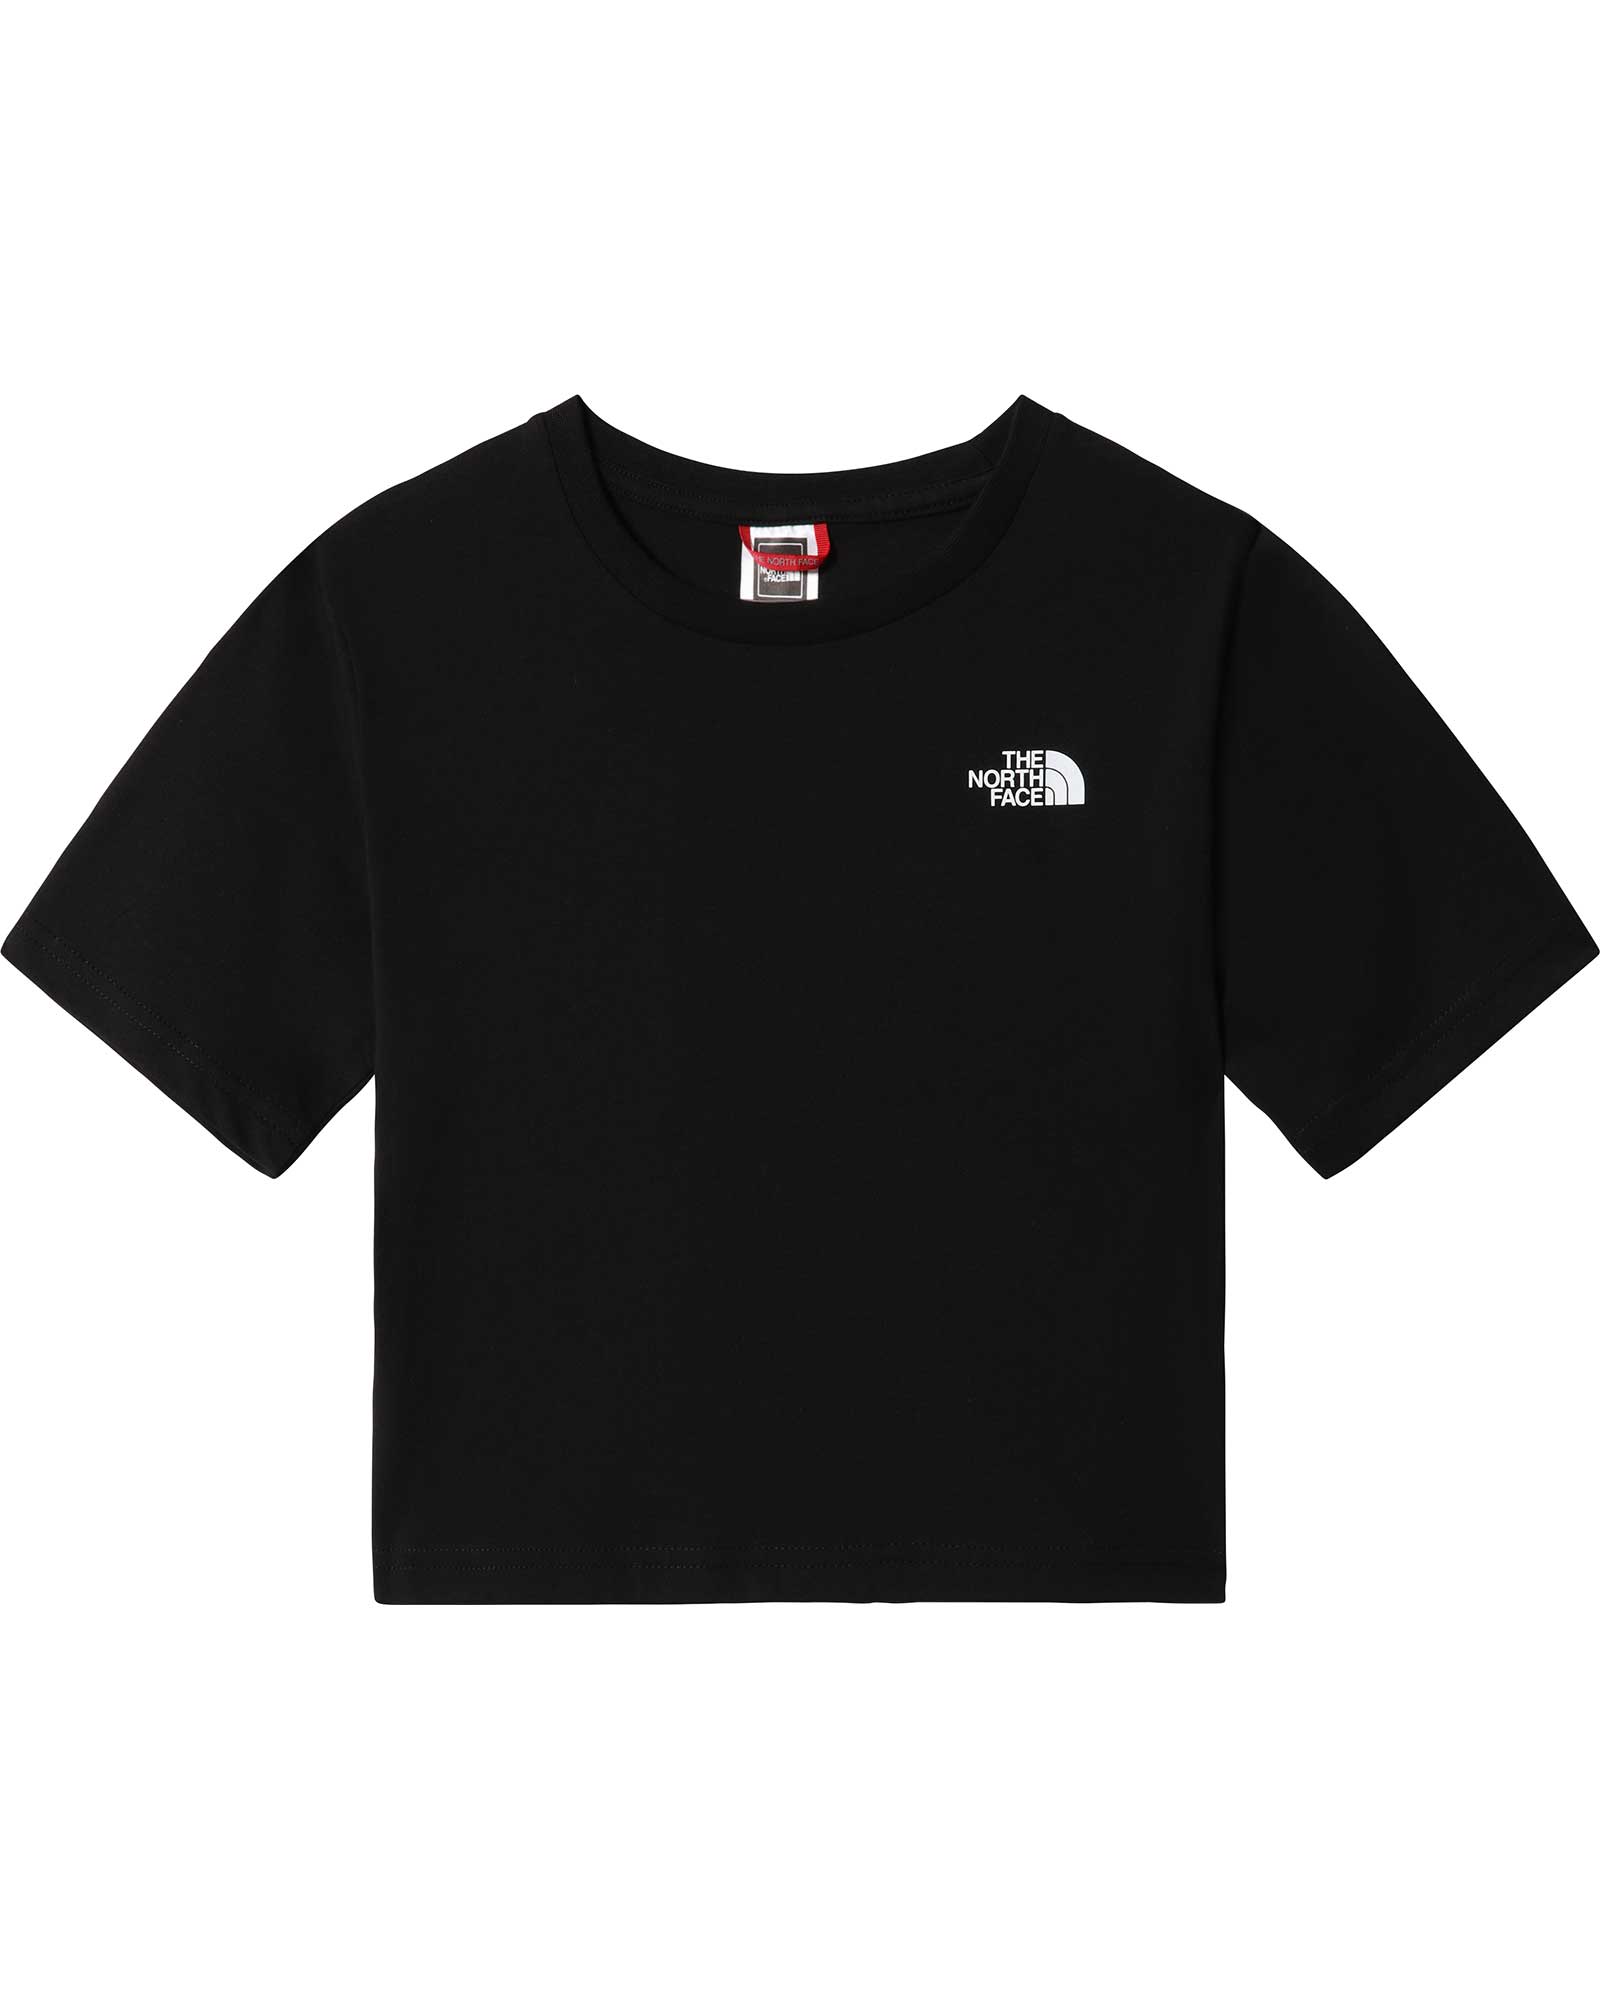 Product image of The North Face Simple Dome Girls' Cropped T-Shirt